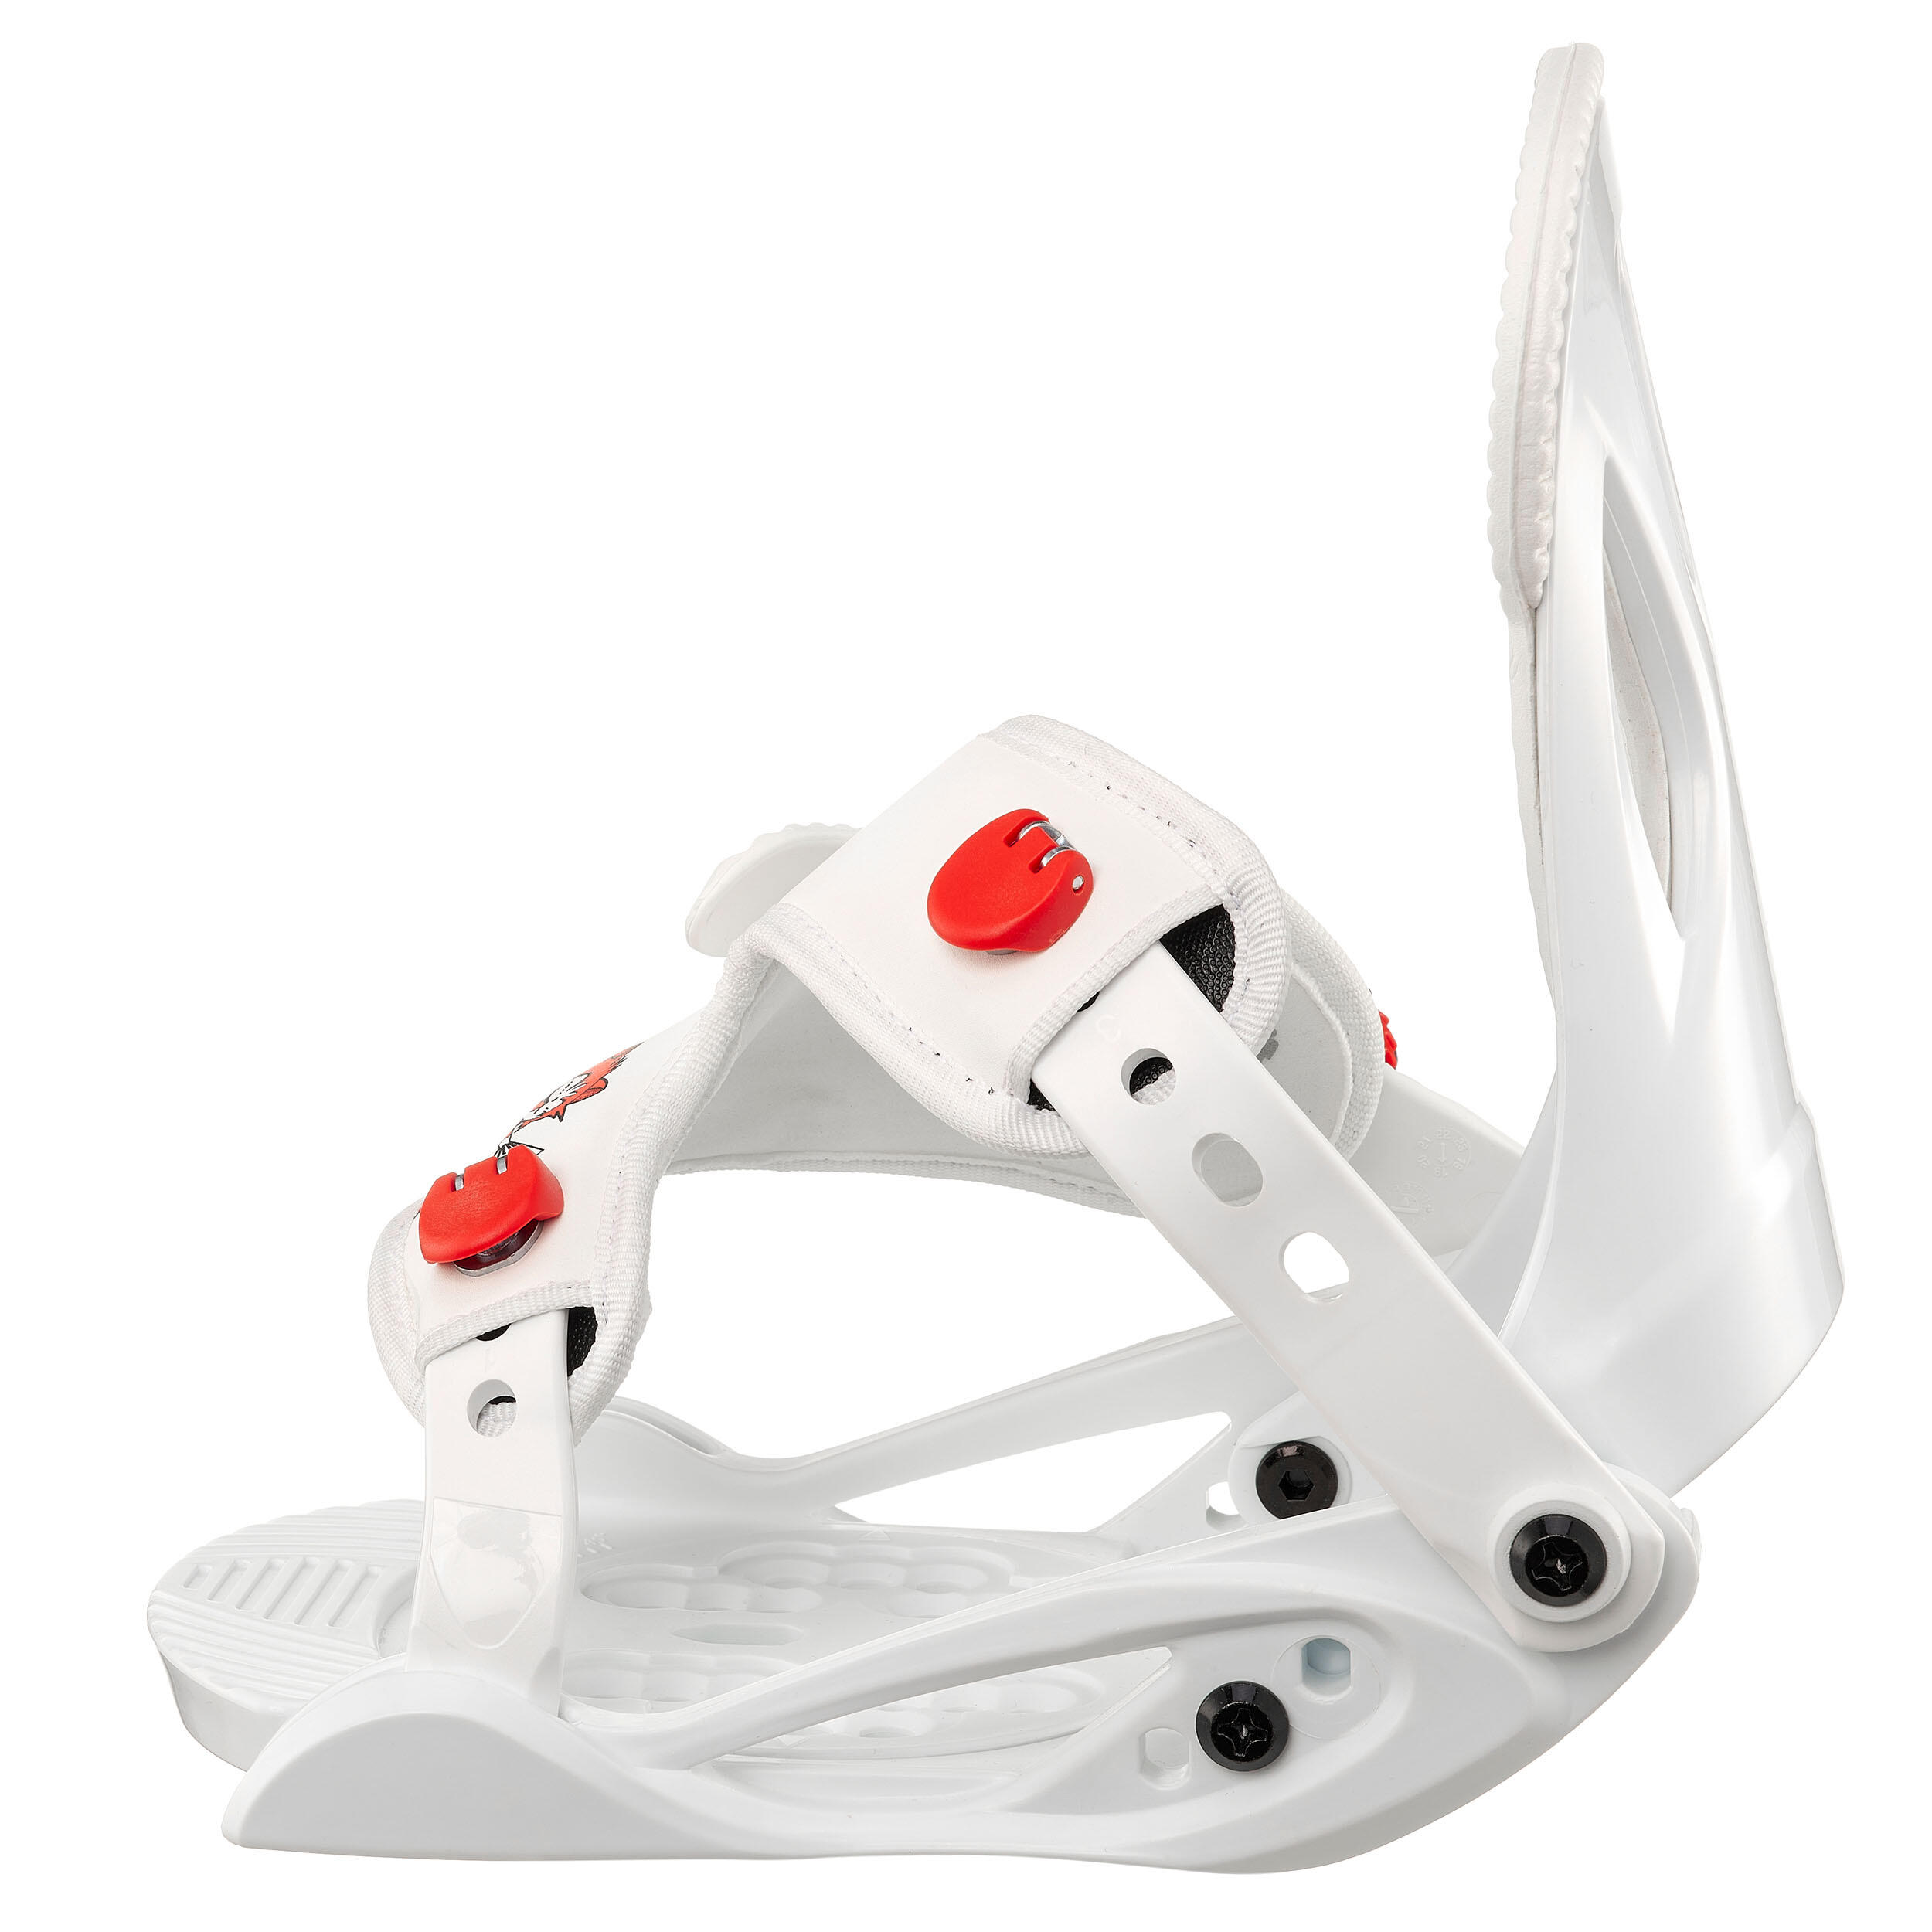 Kids’ Quick Snowboard Bindings  - Faky XS - White and Red 4/9